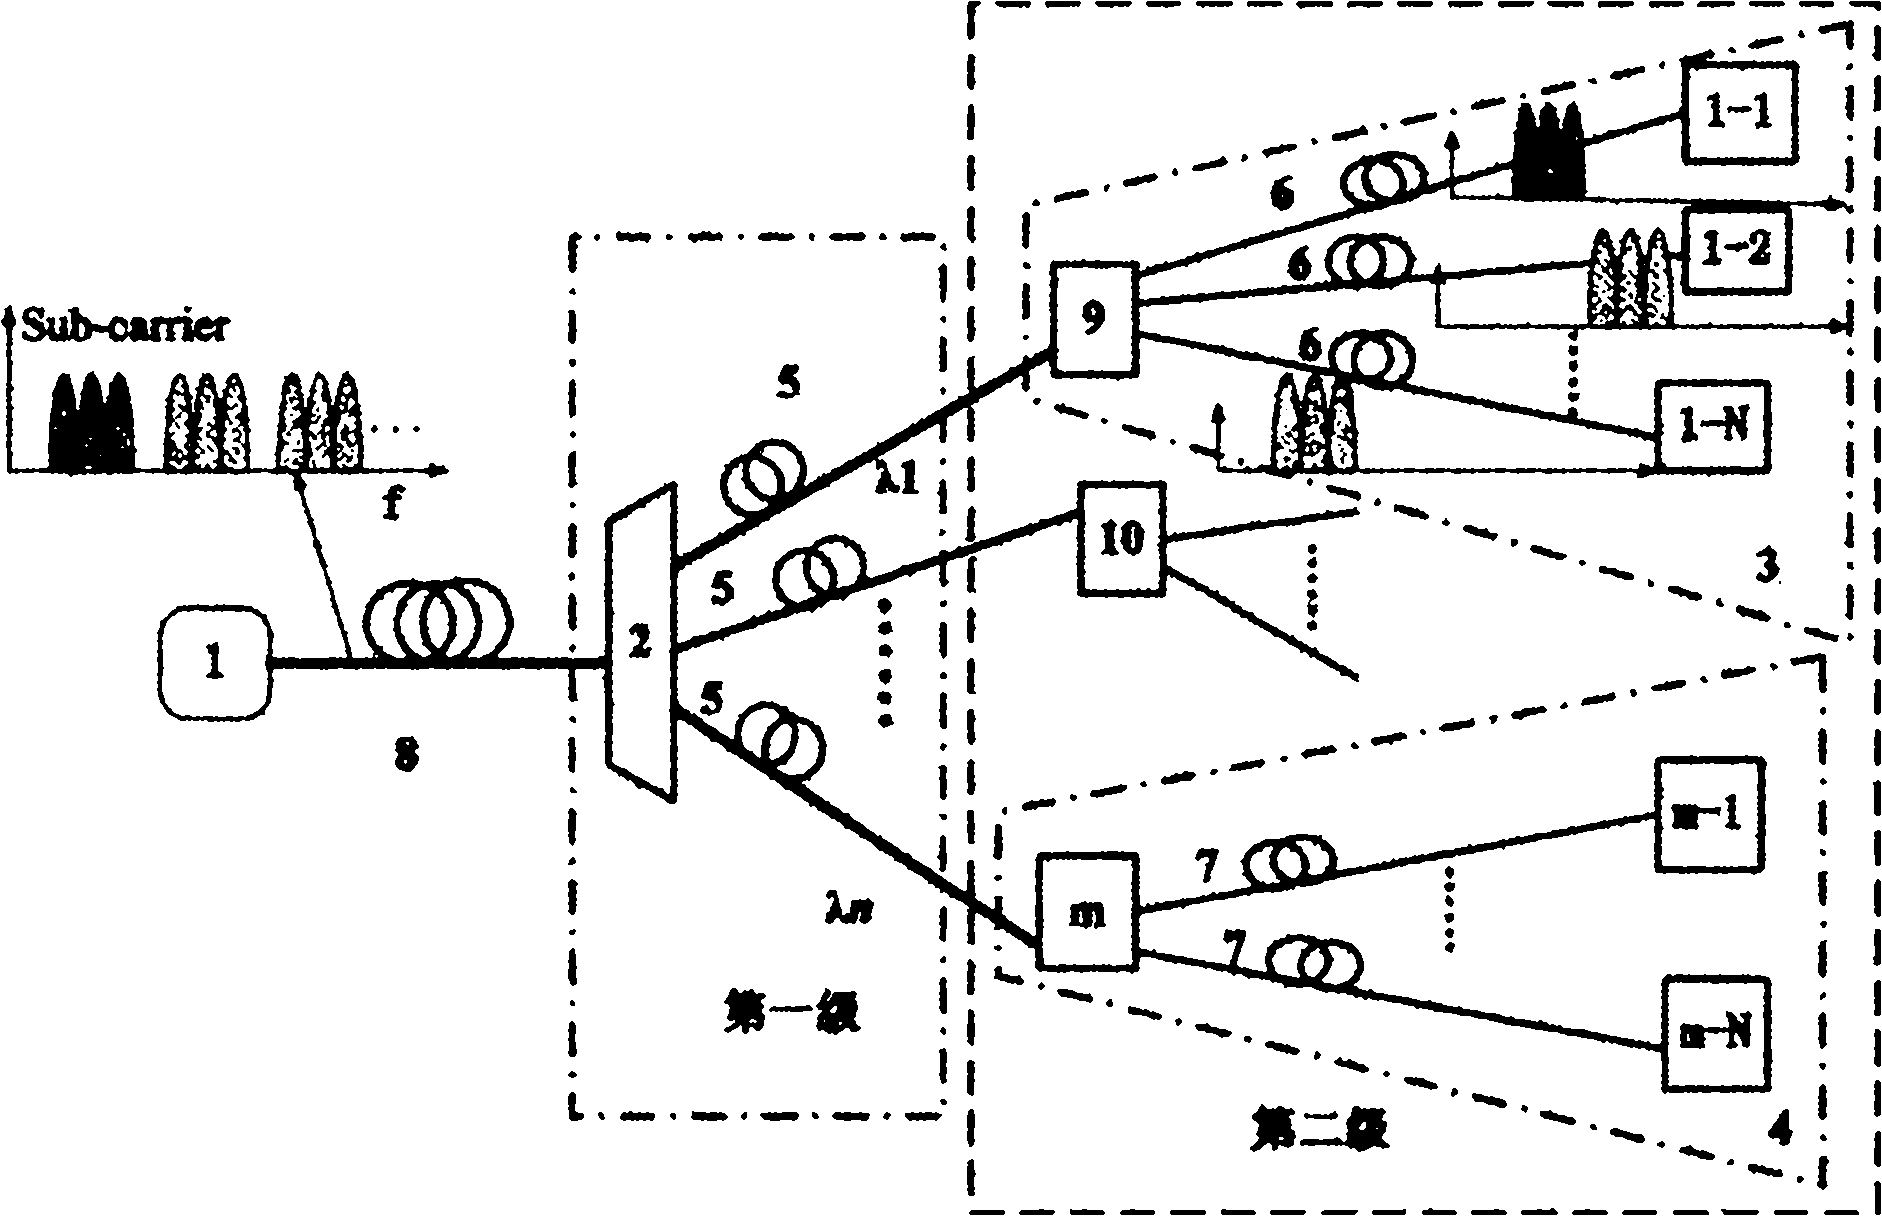 OFDMA (Orthogonal Frequency Division Multiplex Address)-based mixed passive optical network transmission system